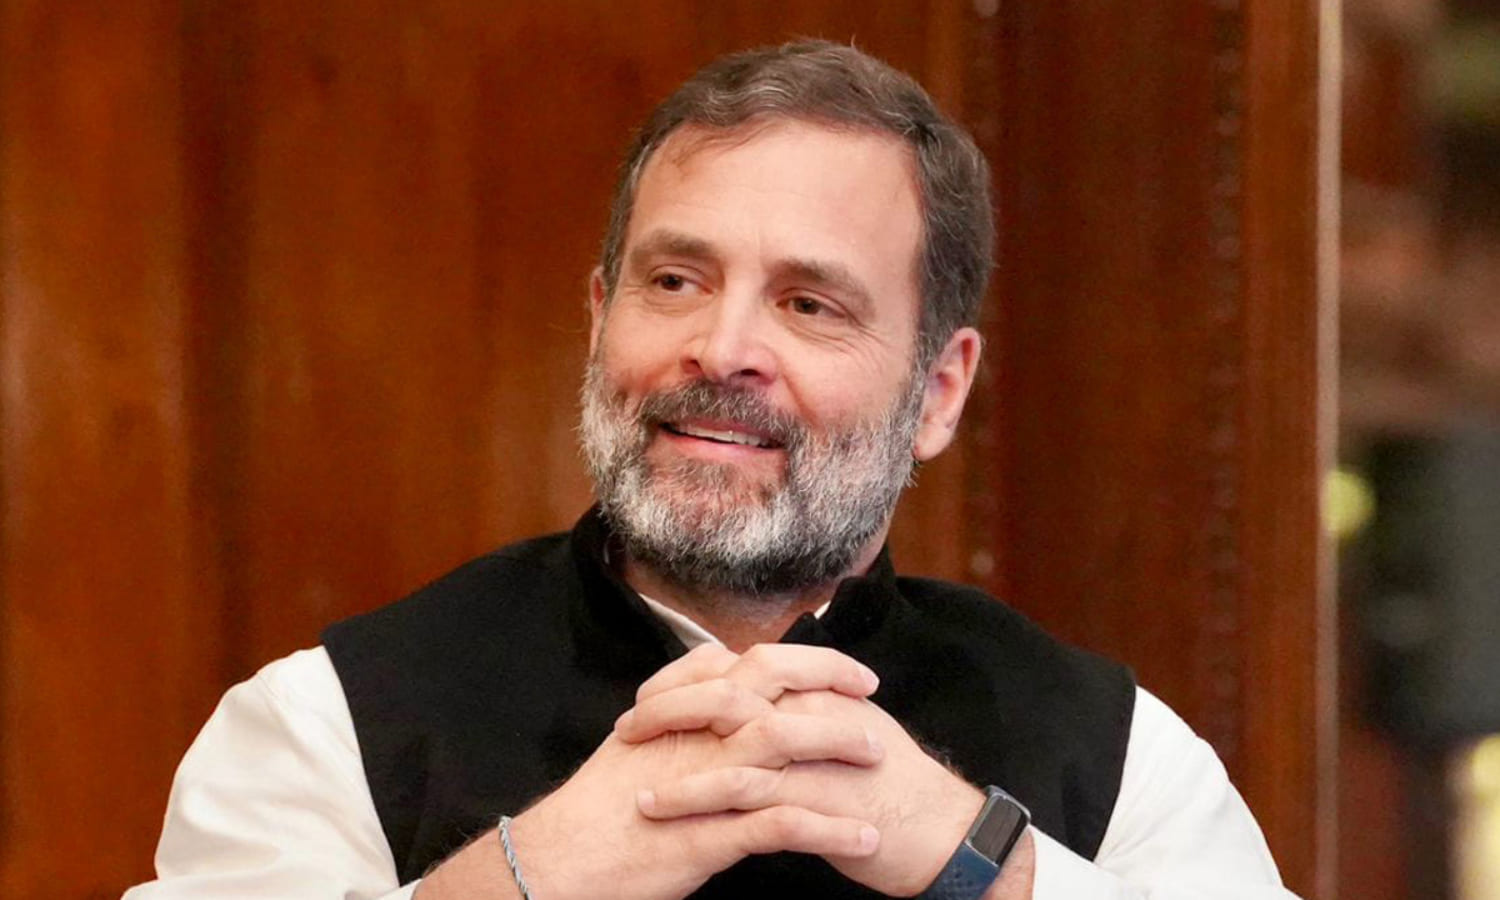 Rahul Gandhi West Age, Height, Wife, Family – Biographyprofiles